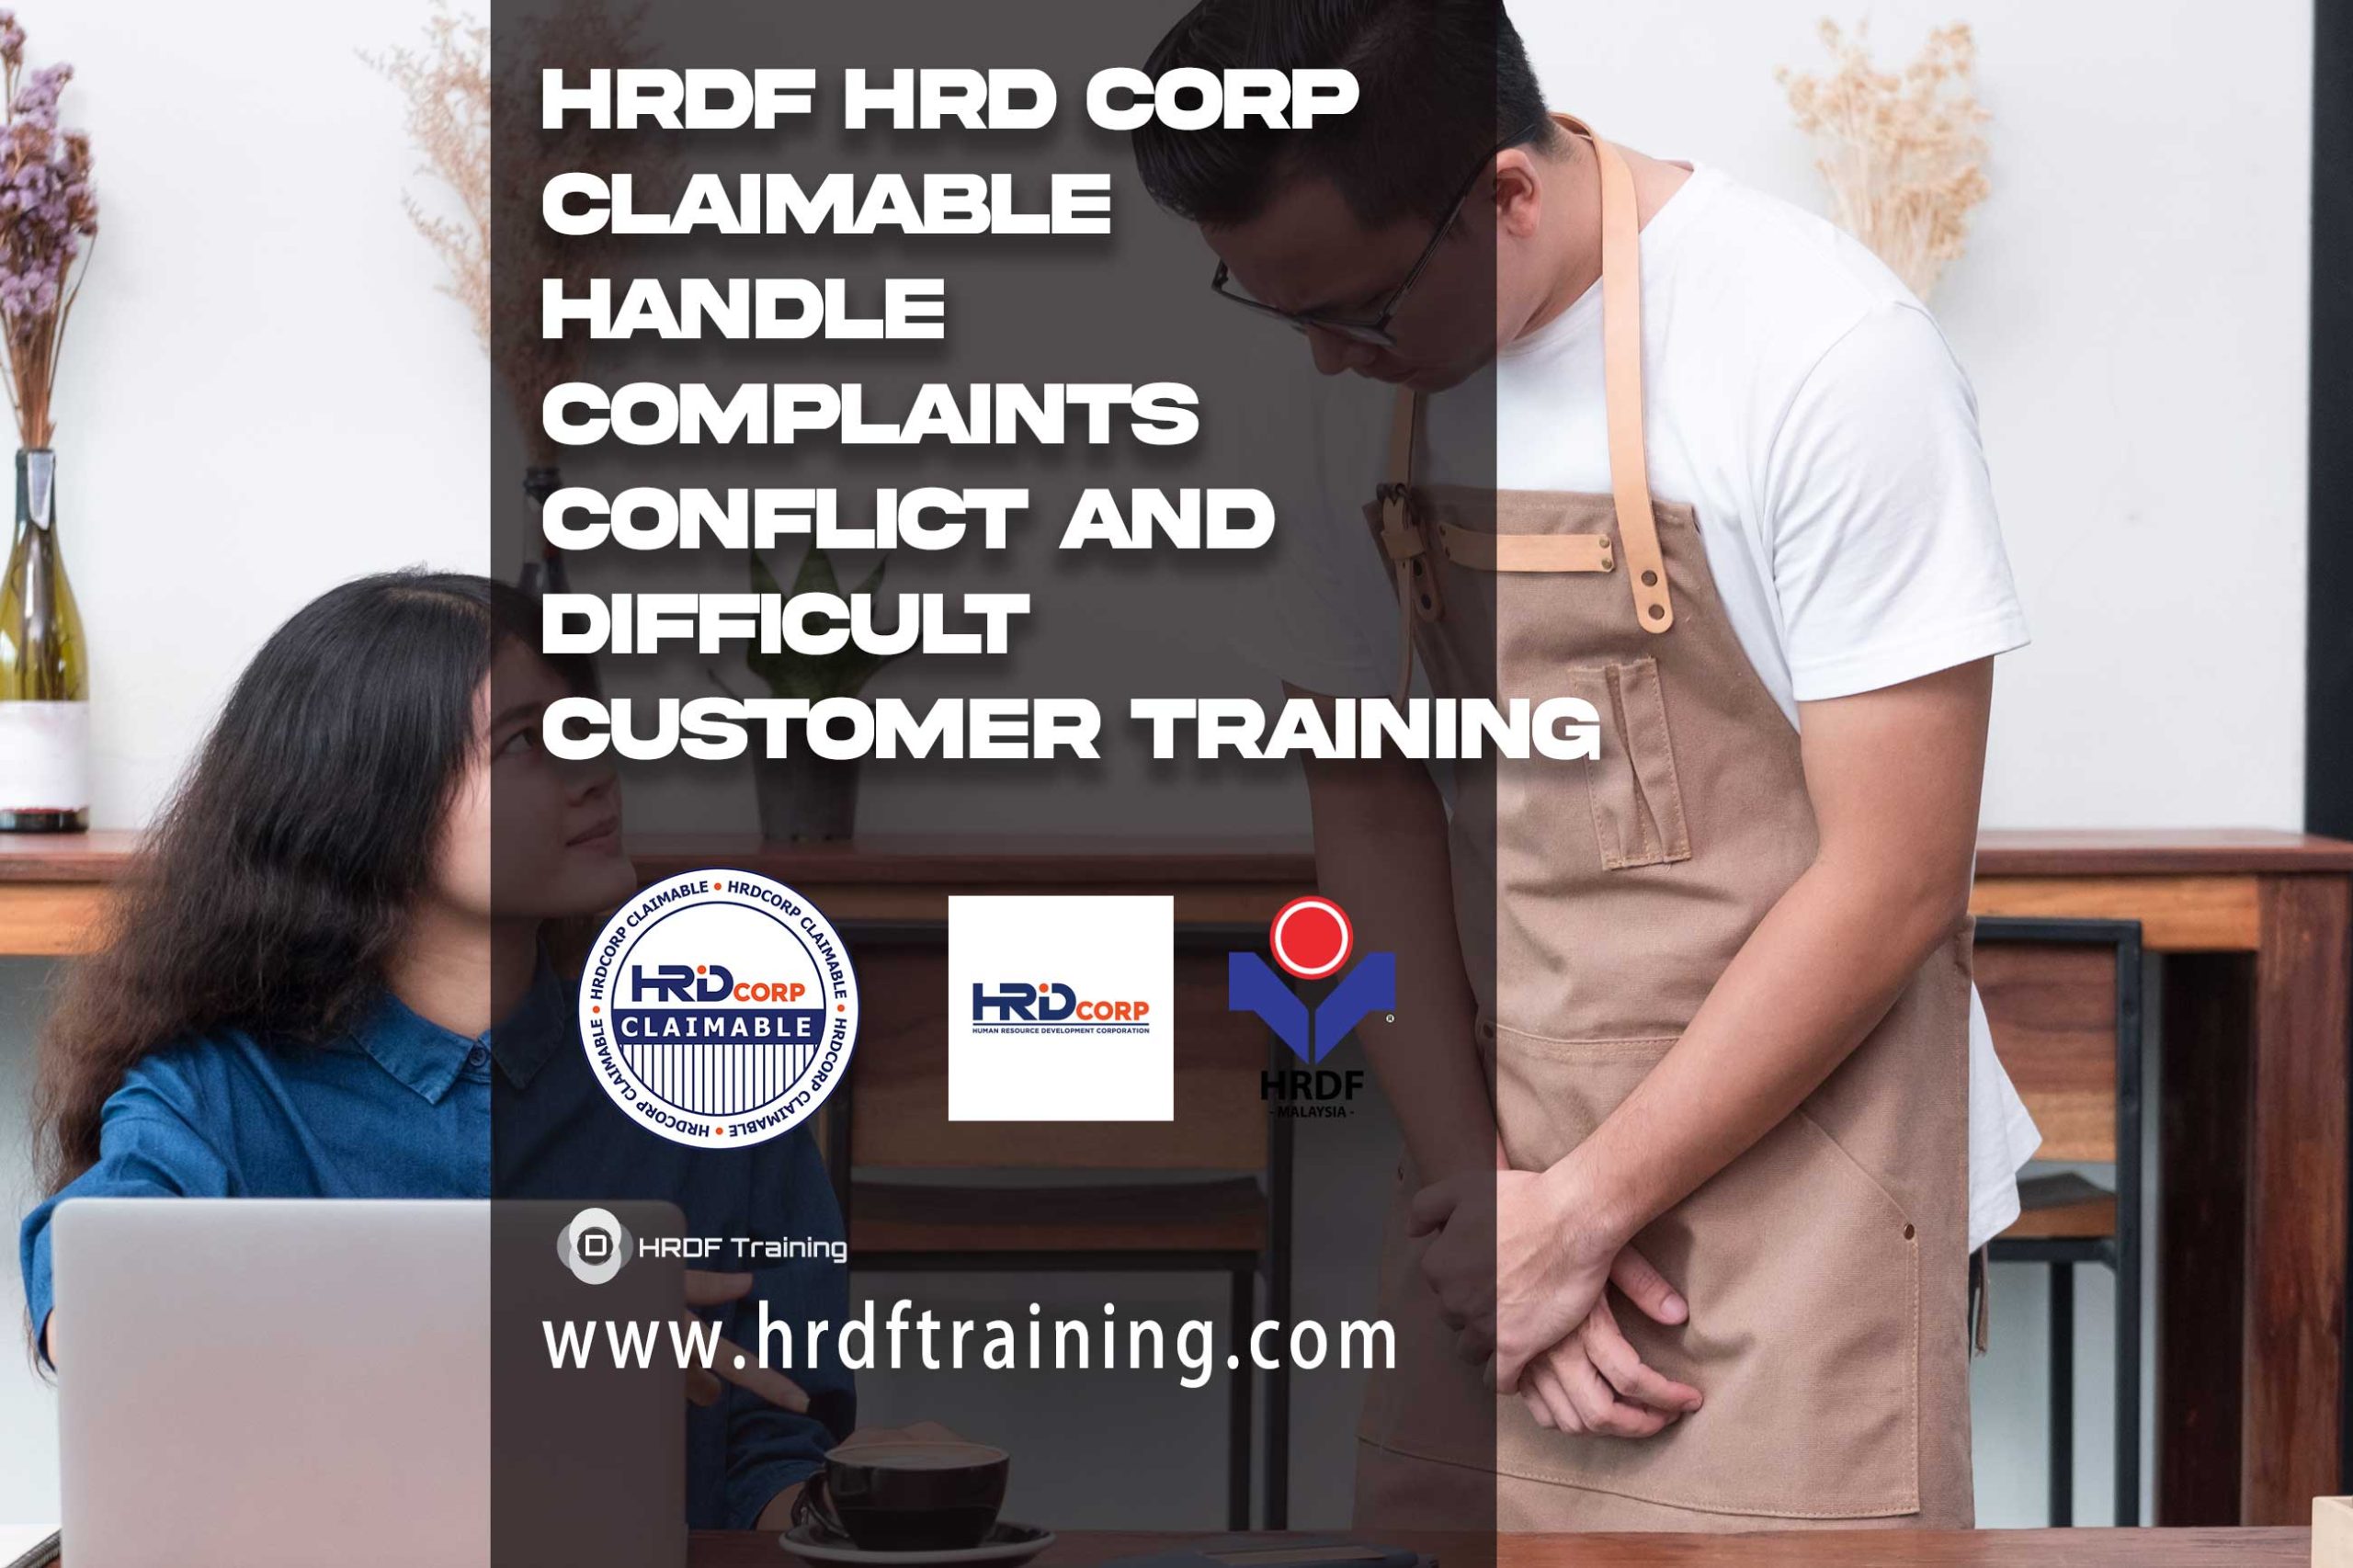 HRDF-HRD-Corp-Claimable-Handle-Complaints-Conflict-and-Difficult-Customer-Training